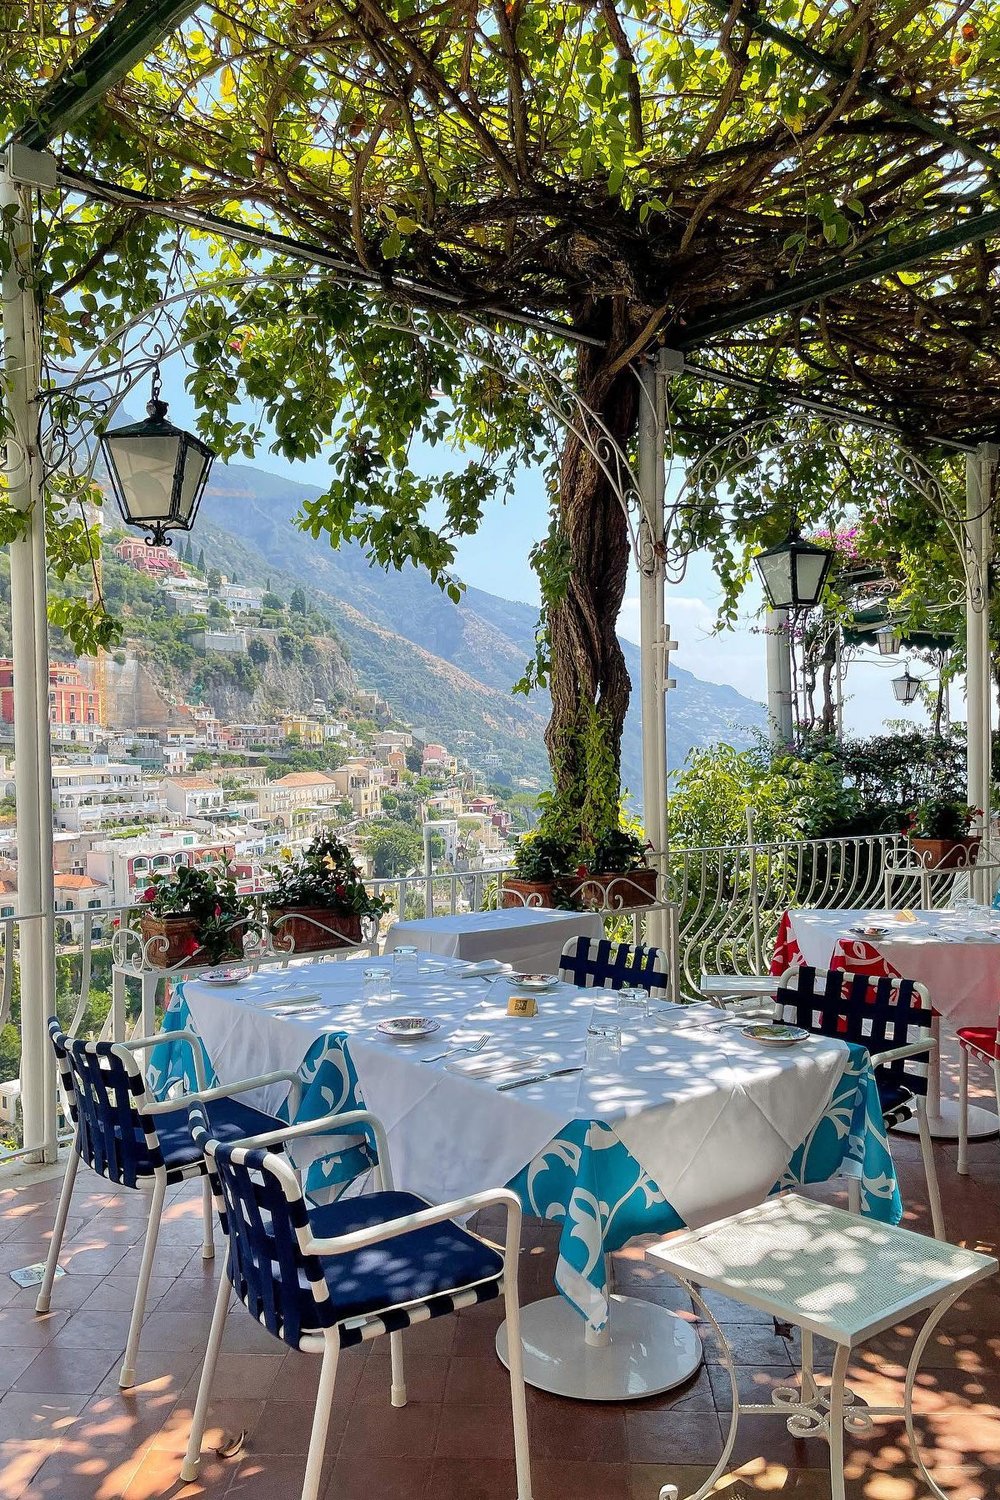 Where to stay in Positano - Hotel Poseidon is the best 4 star option